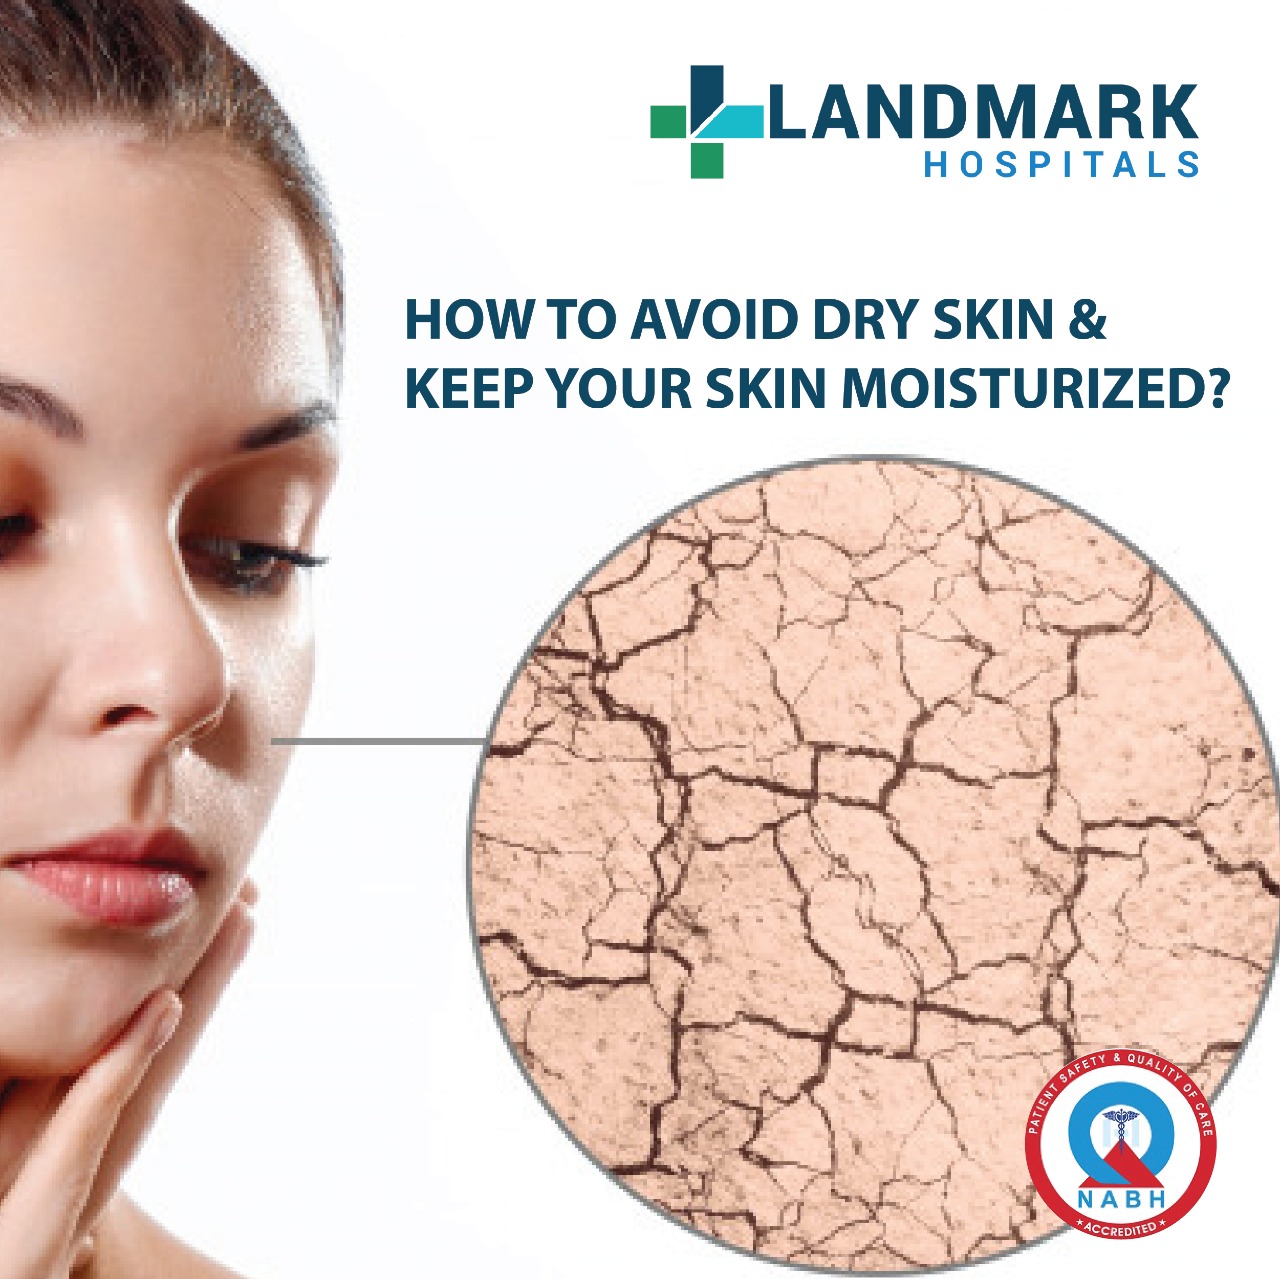 How to Avoid Dry Skin & Keep your Skin Moisturized?